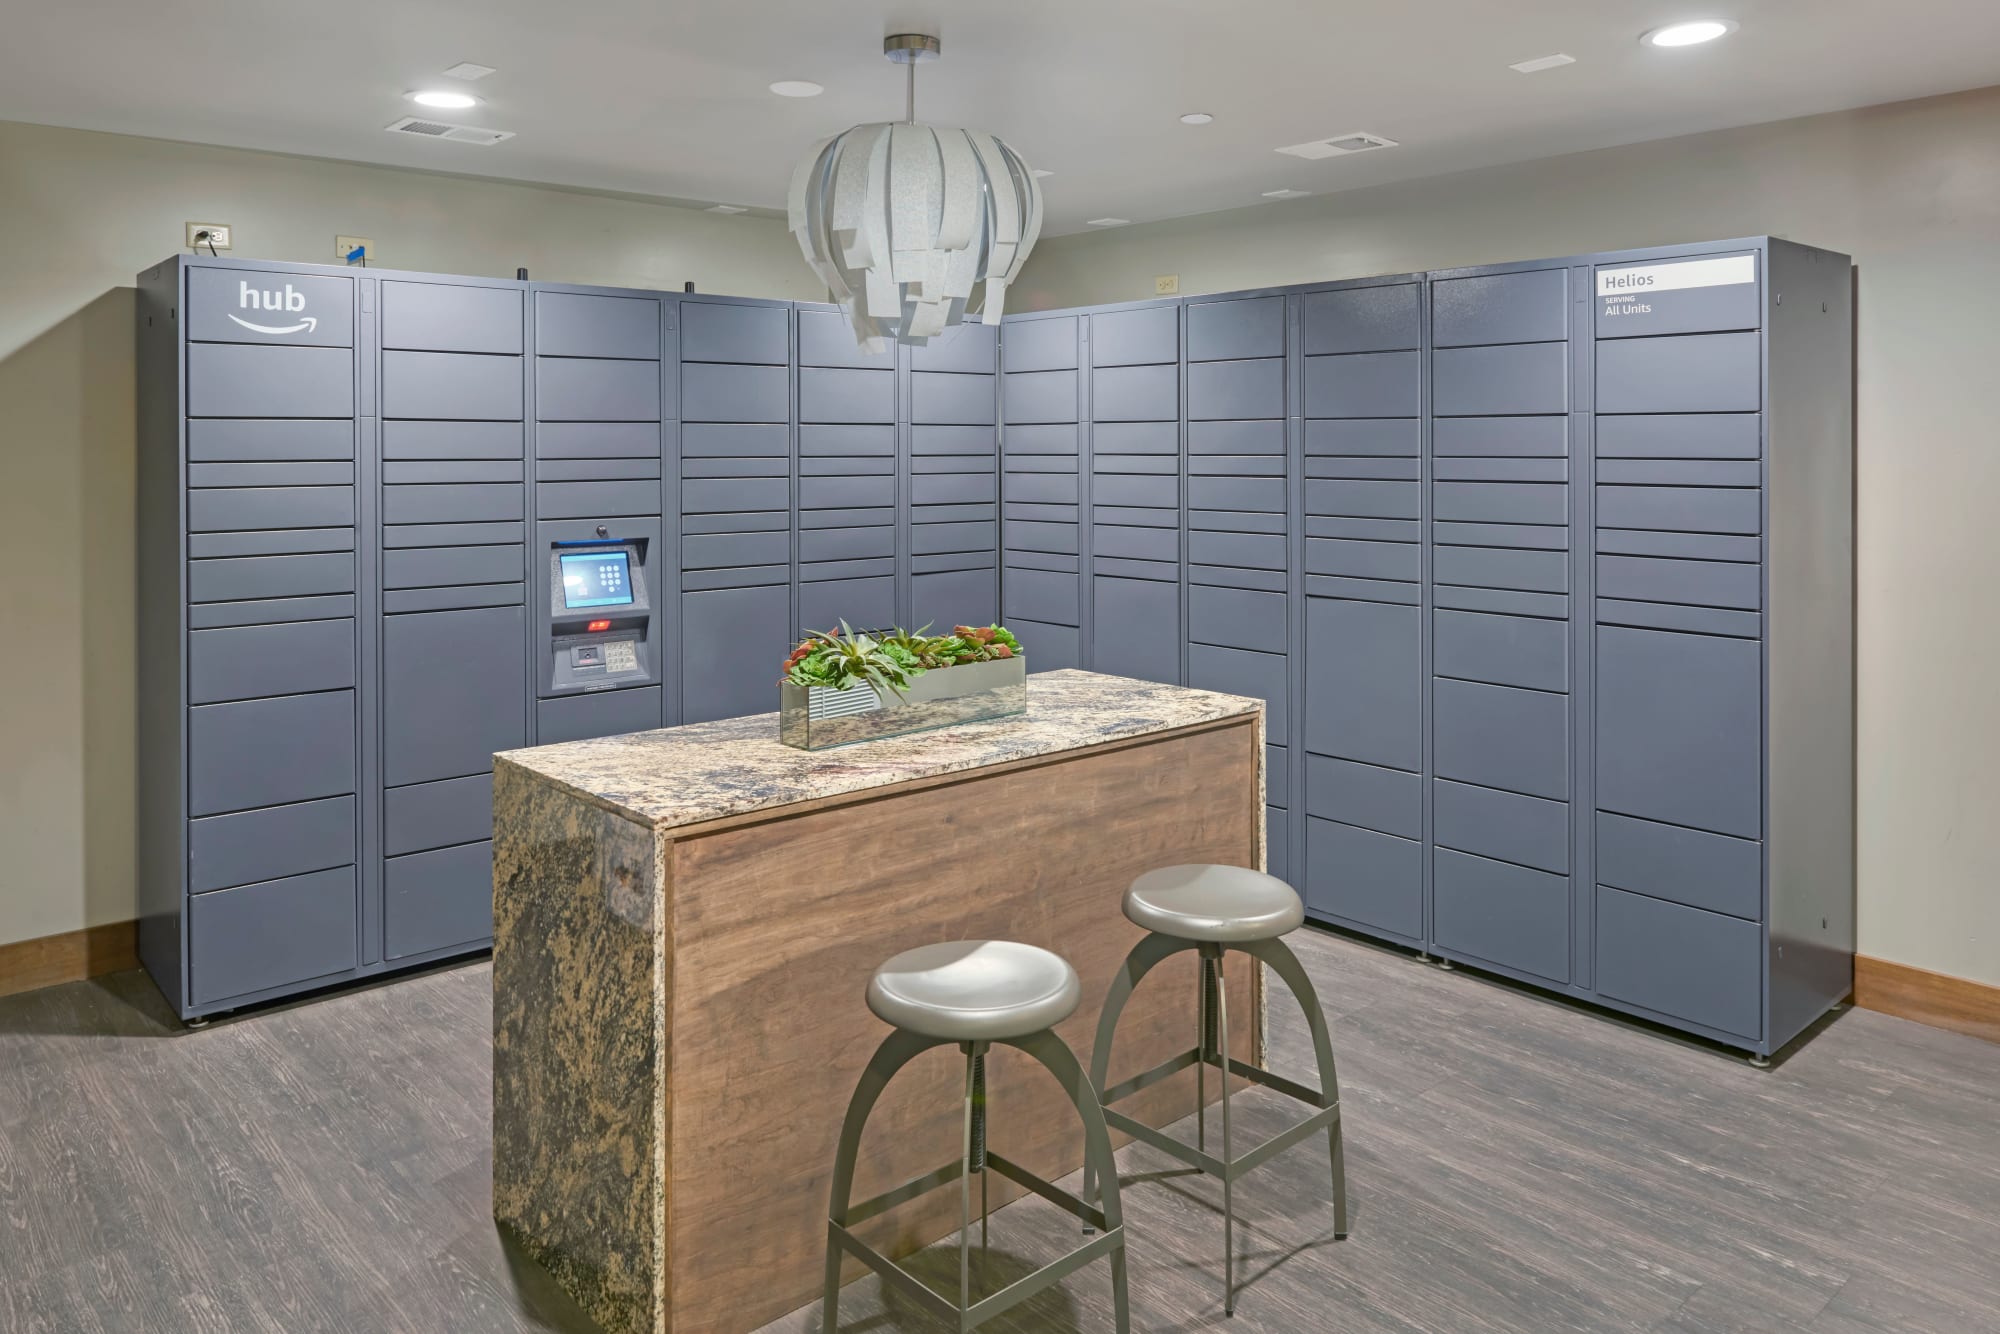 24-Hour Package Lockers with Amazon HUB at Helios in Englewood, Colorado